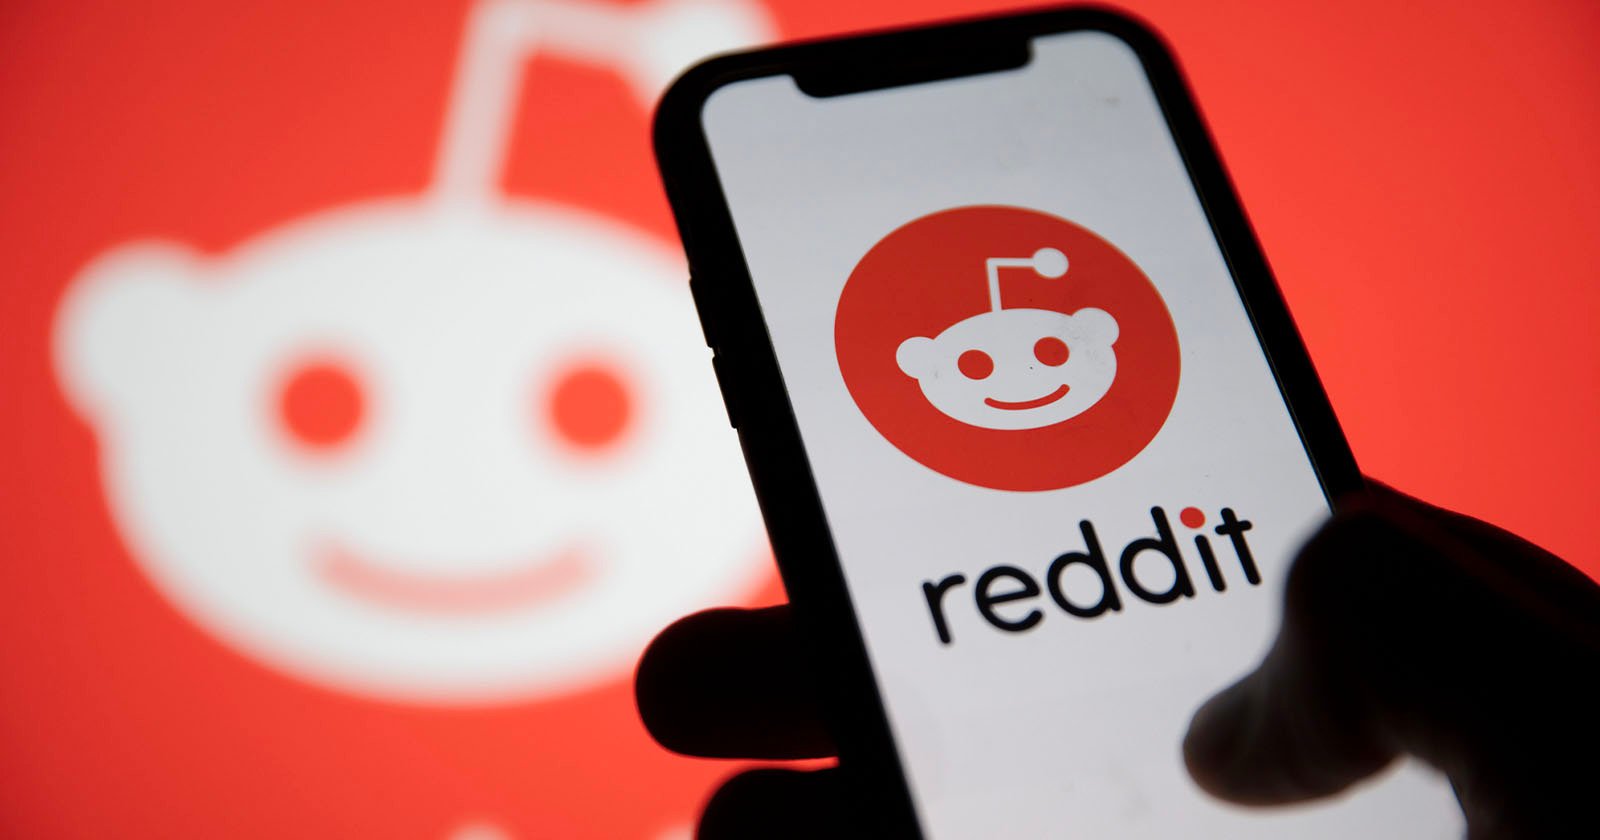 Photography Subreddits Go Dark as Redditors Protest Against the Company